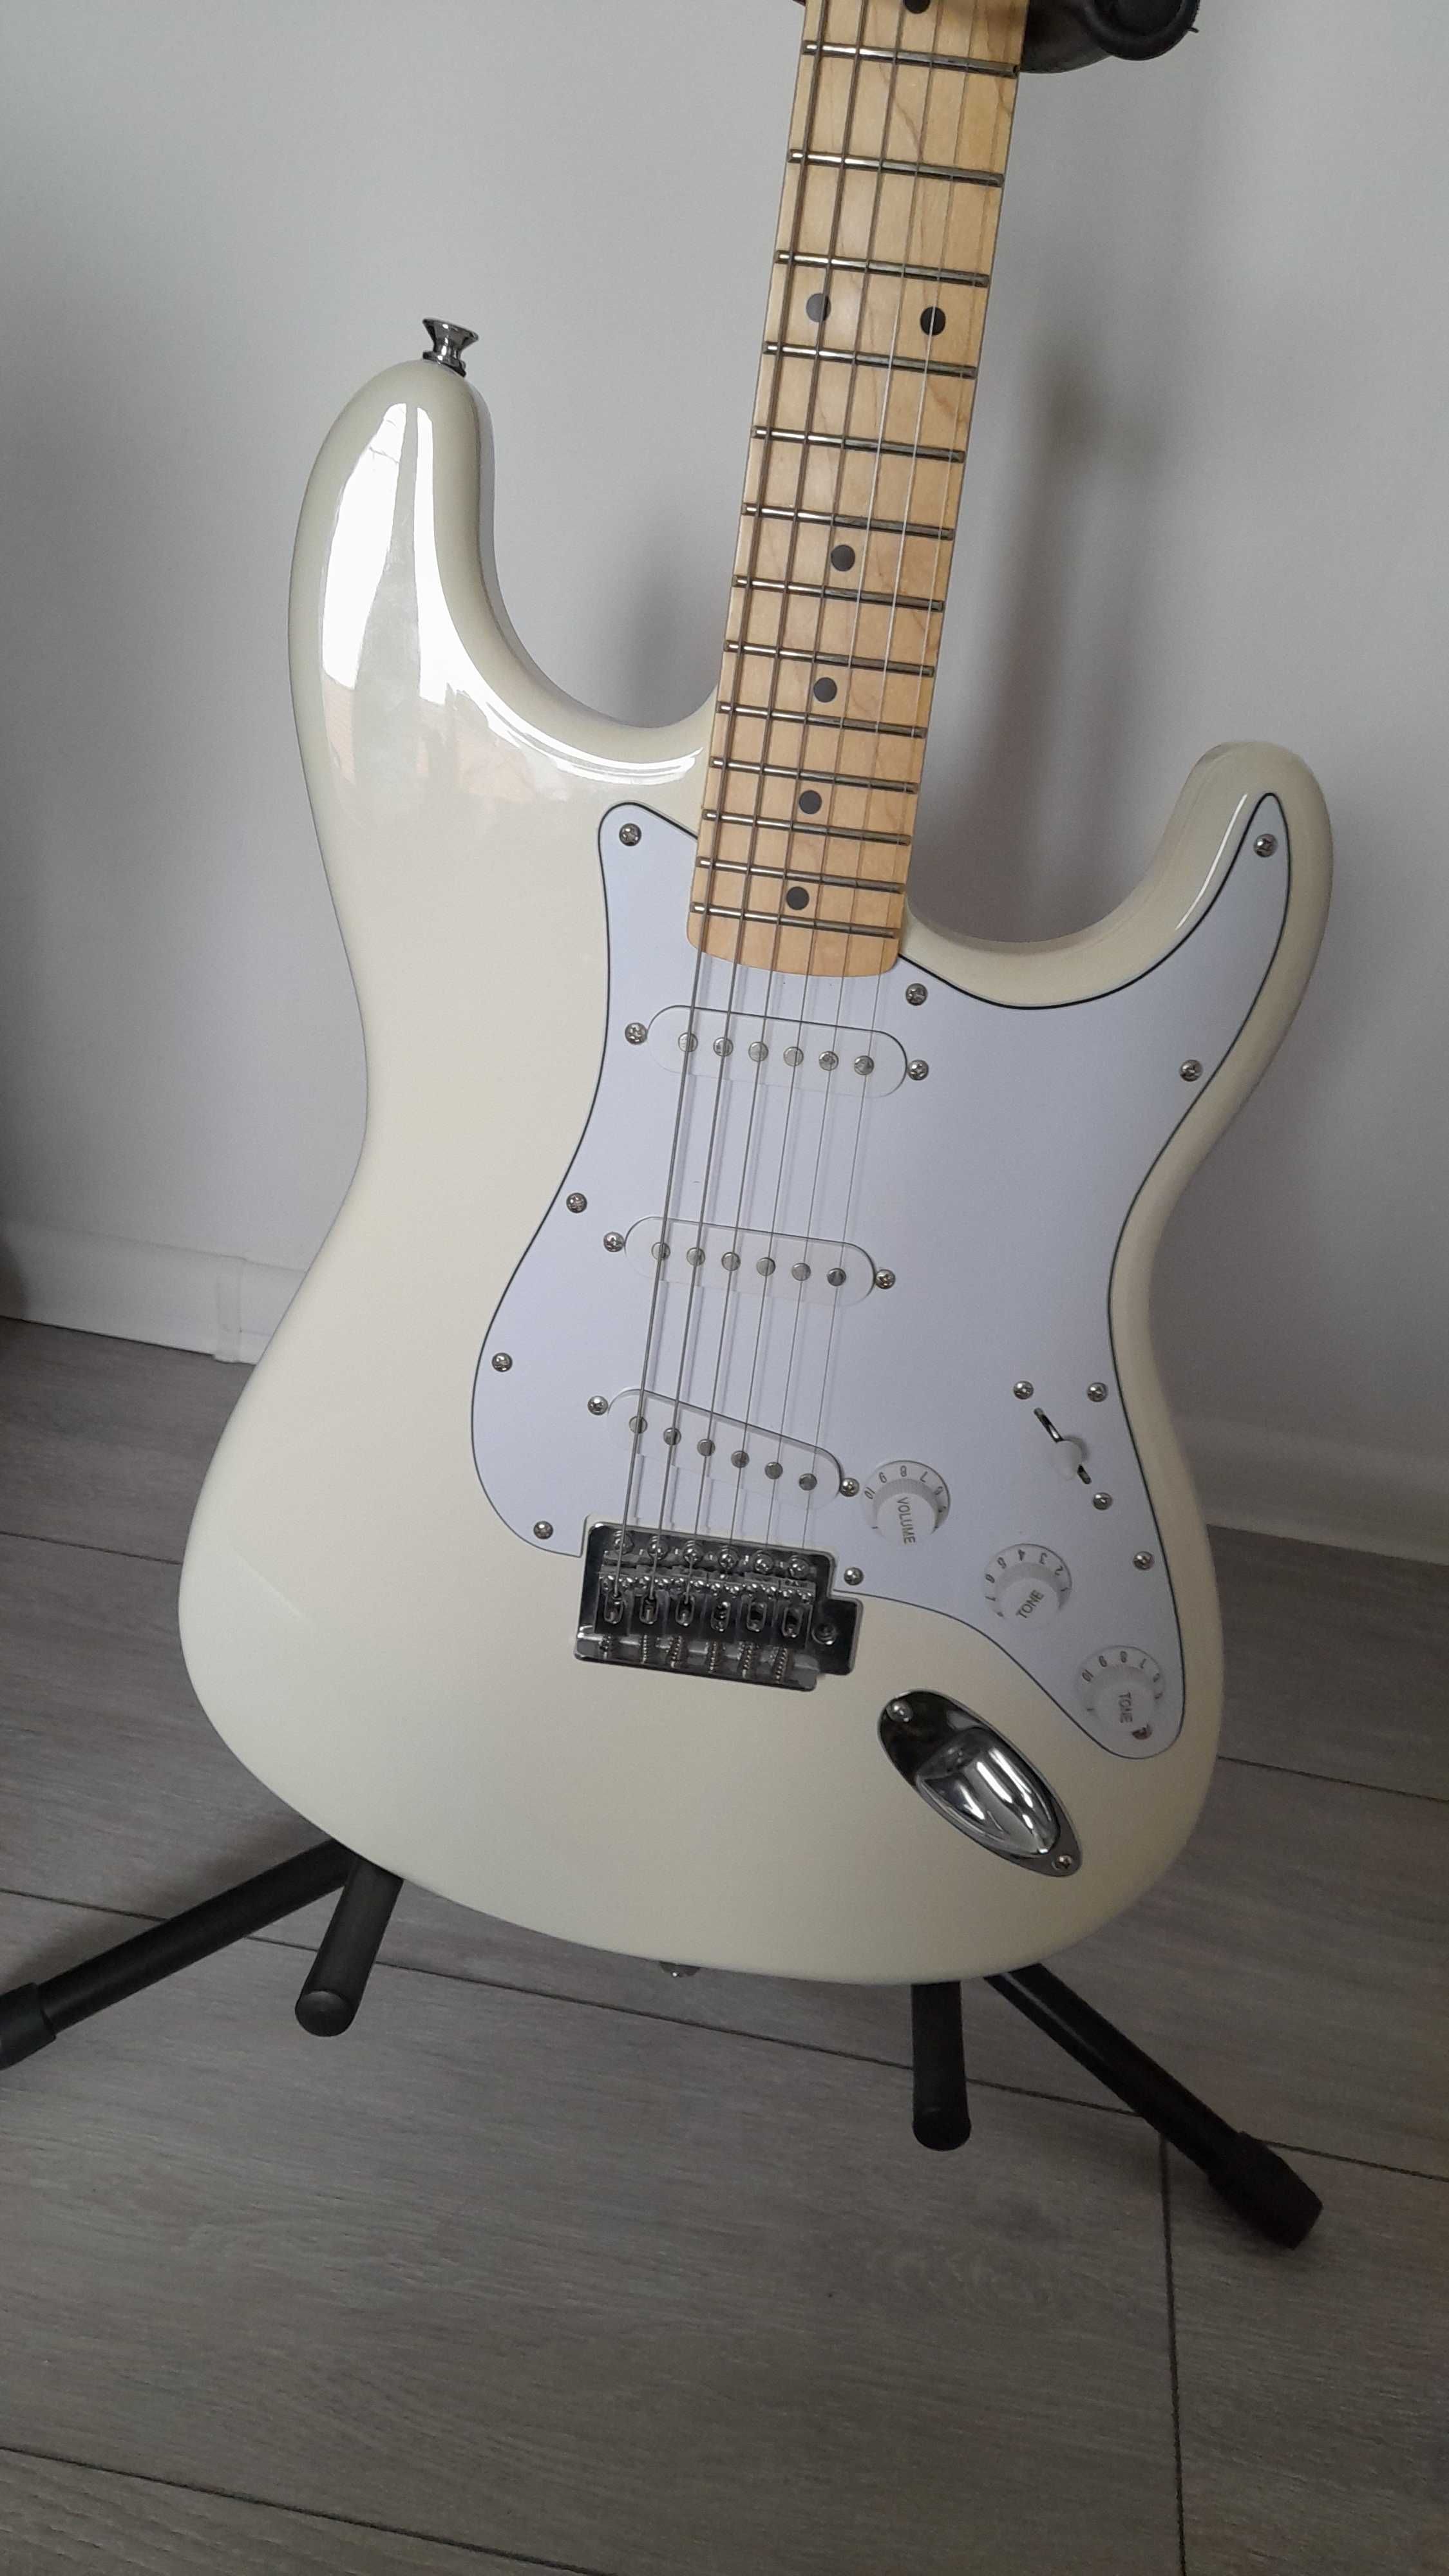 Squier by fender stratocaster biały SSS affinity